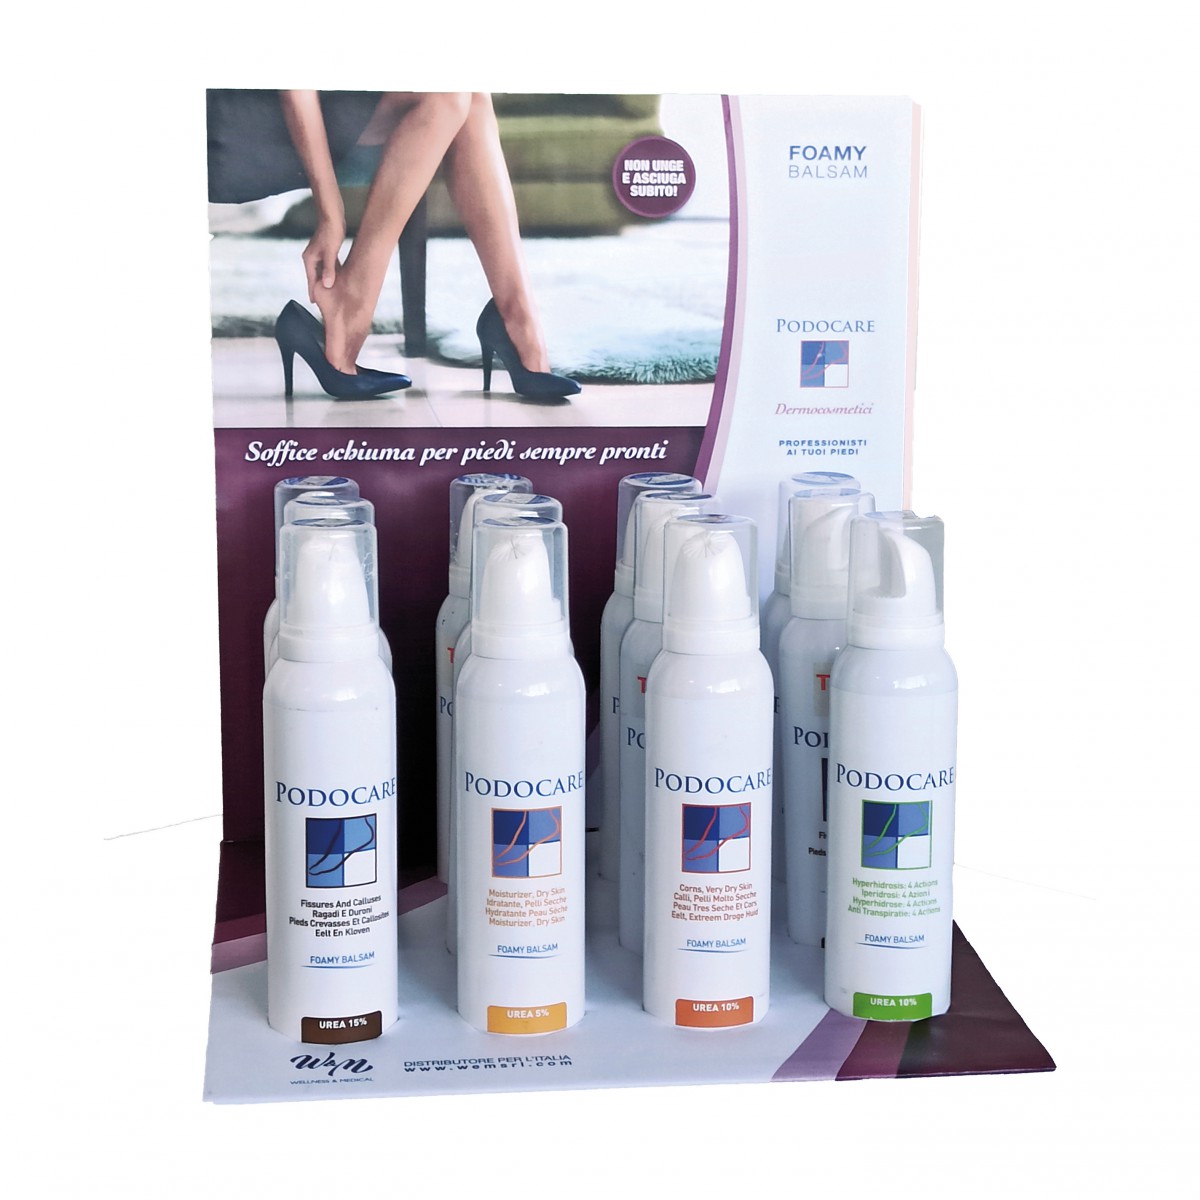 Action Podocare Foamy Display